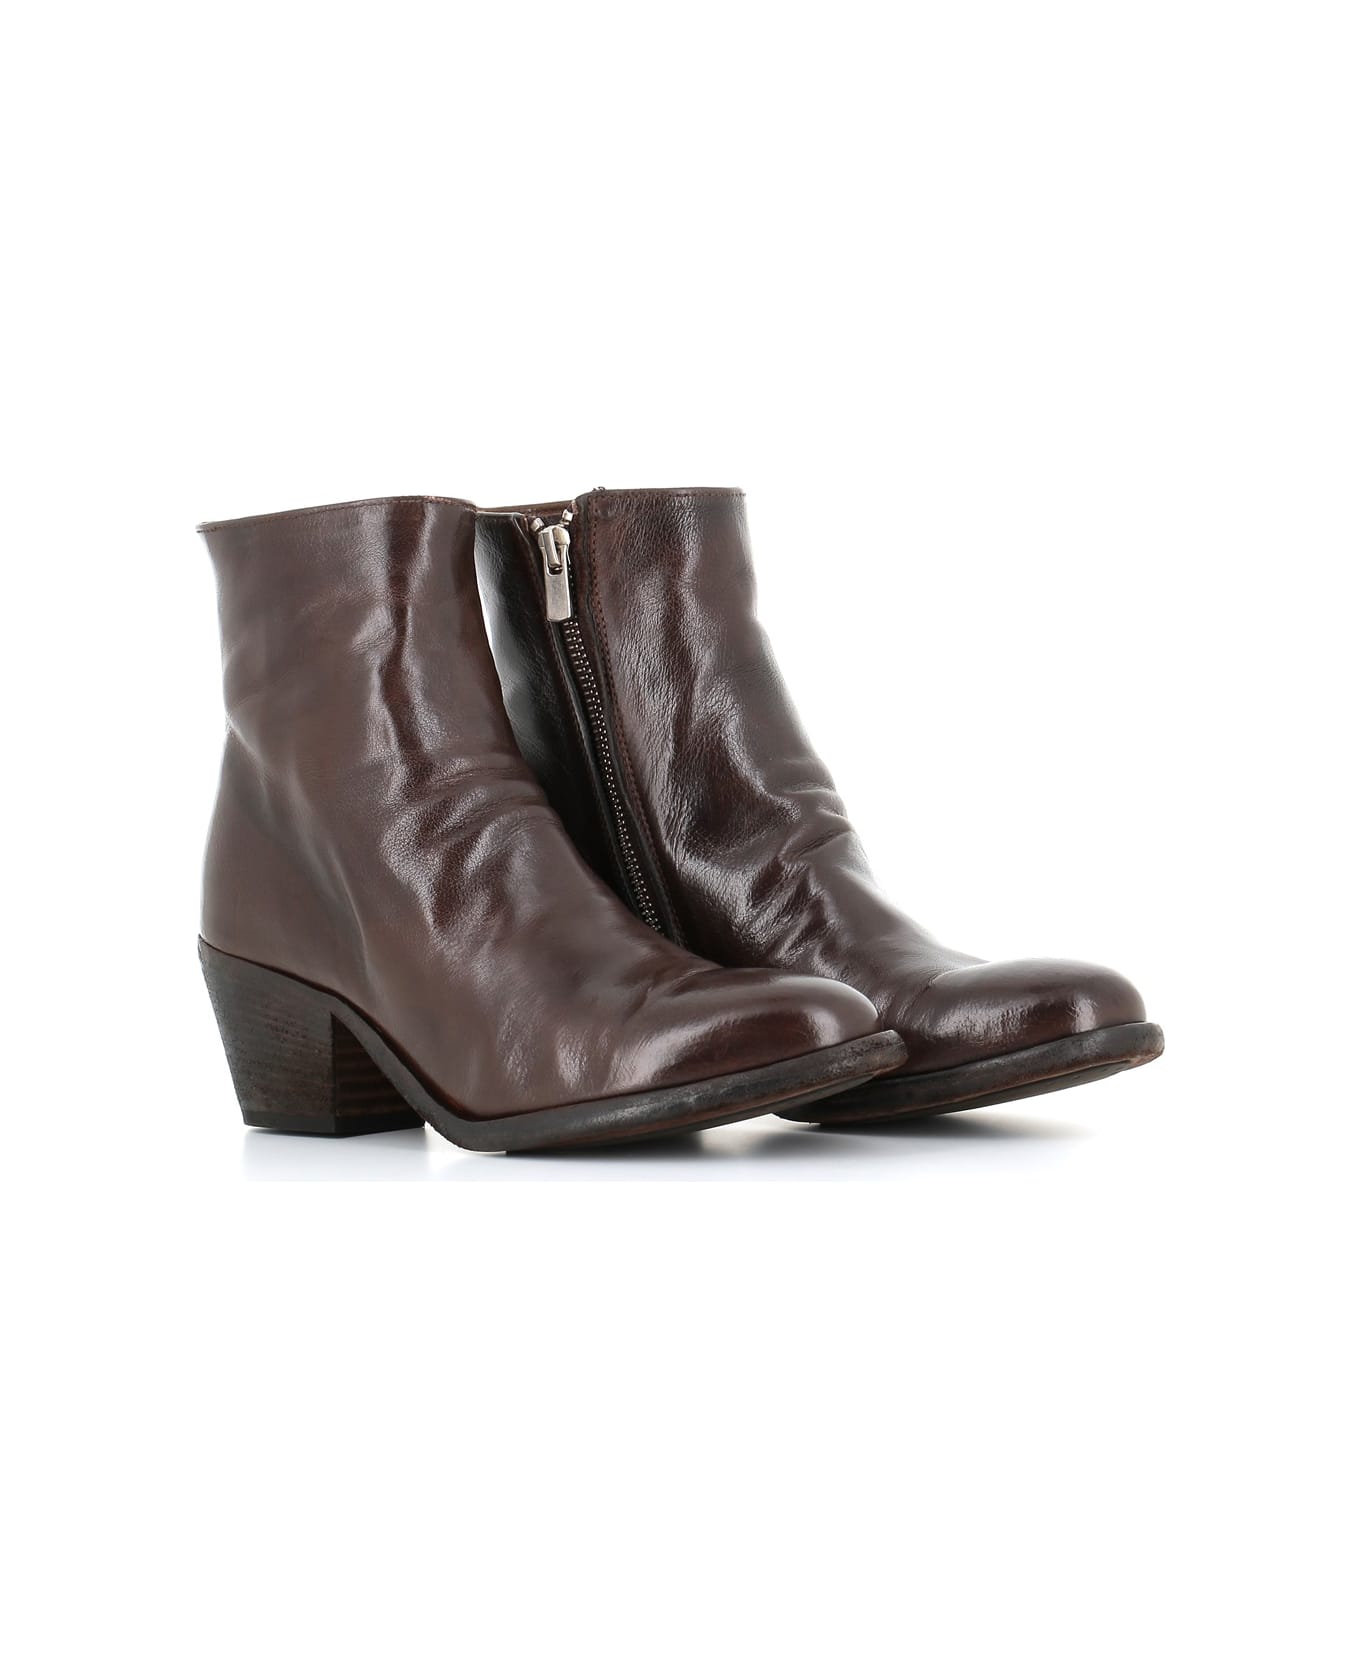 Officine Creative Ankle Boot Sherry/003 - Brown ブーツ